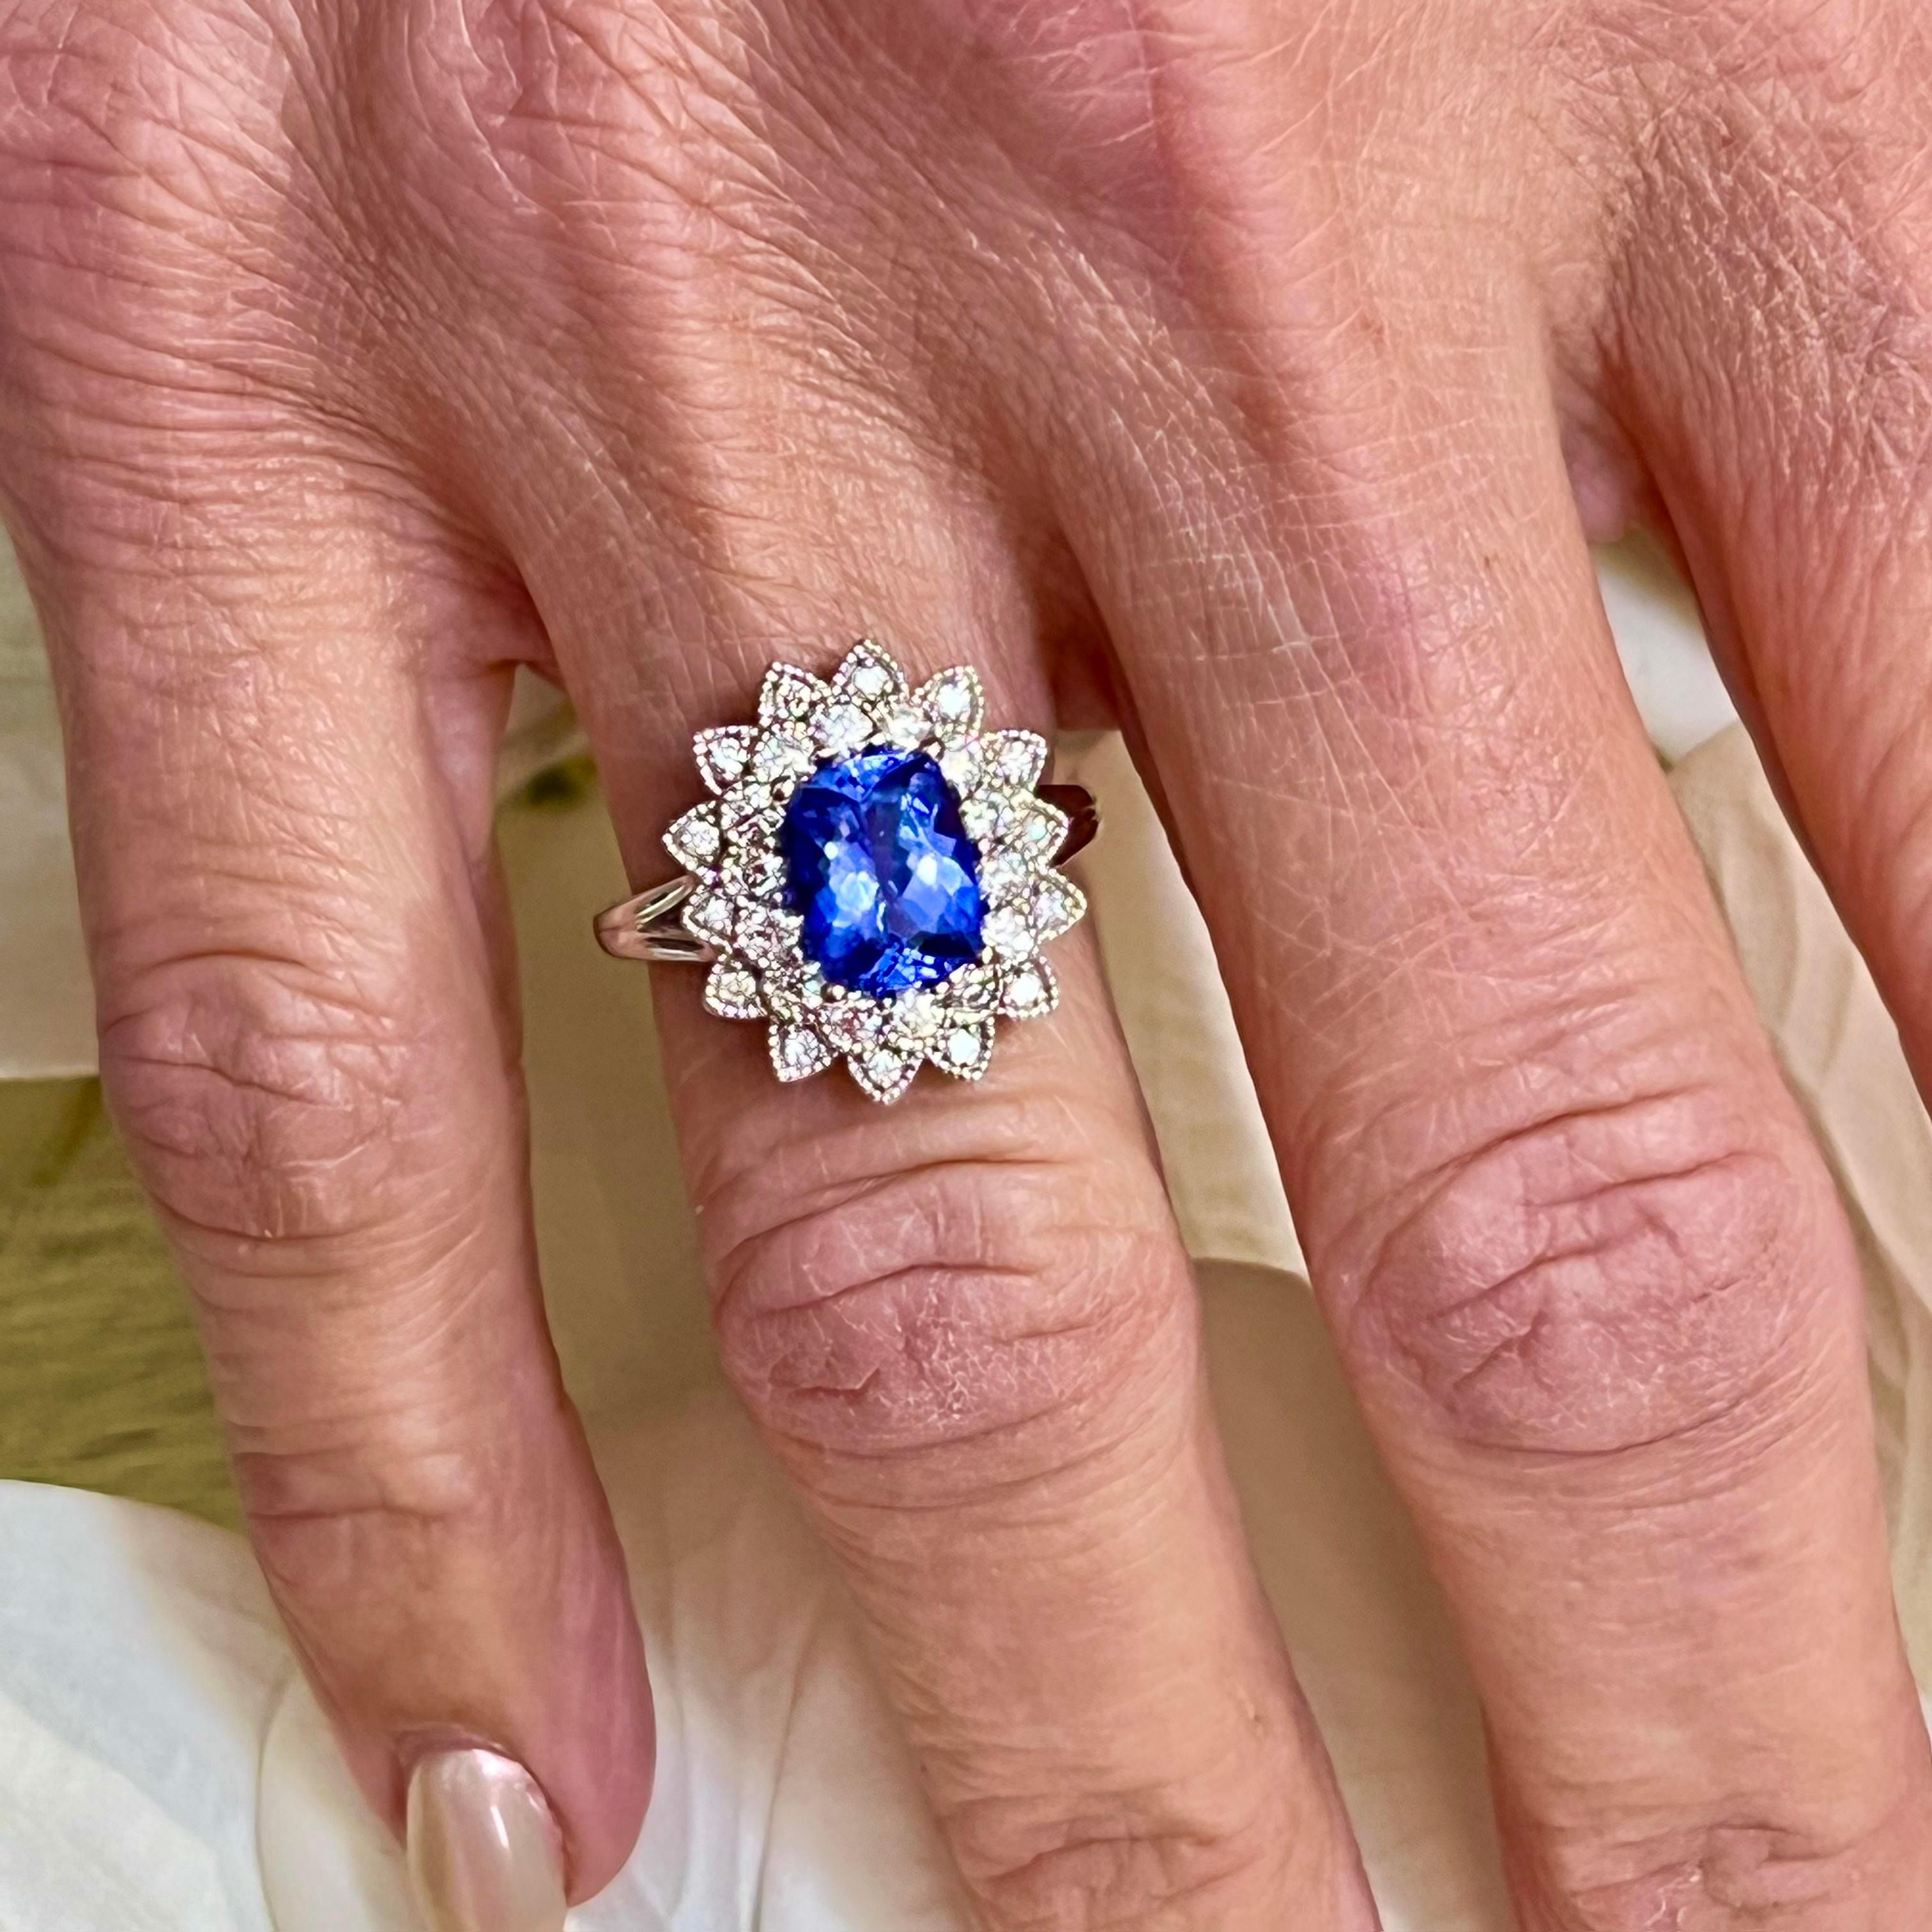 Natural Tanzanite Diamond Ring 6.5 14k W Gold 2.61 TCW Certified $4,950 217842

Nothing says, “I Love you” more than Diamonds and Pearls!

This Tanzanite ring has been Certified, Inspected, and Appraised by Gemological Appraisal